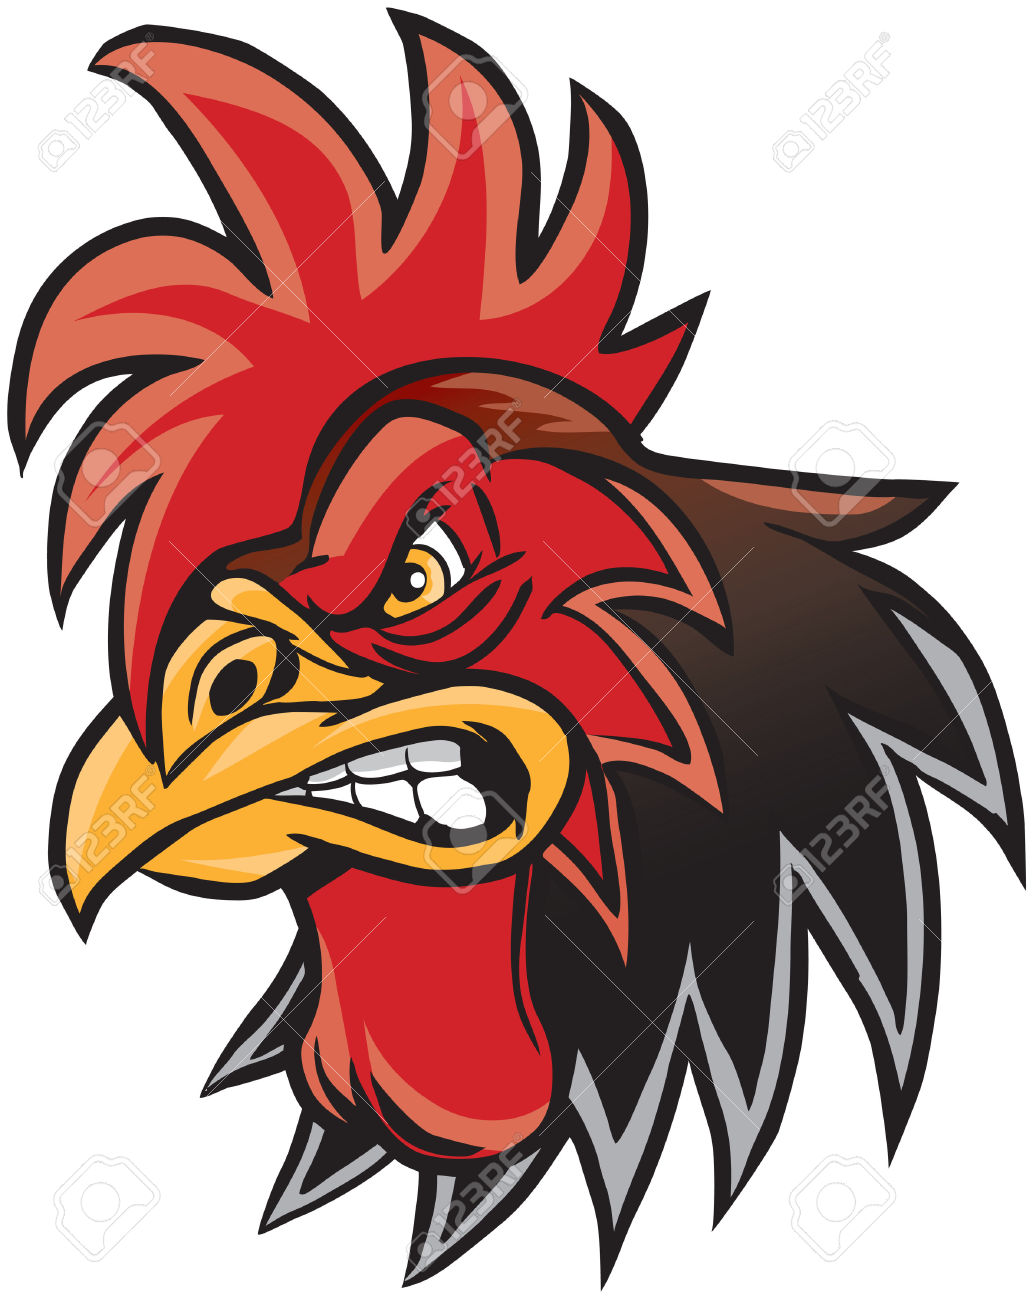 Gallos Finos clipart #15, Download drawings